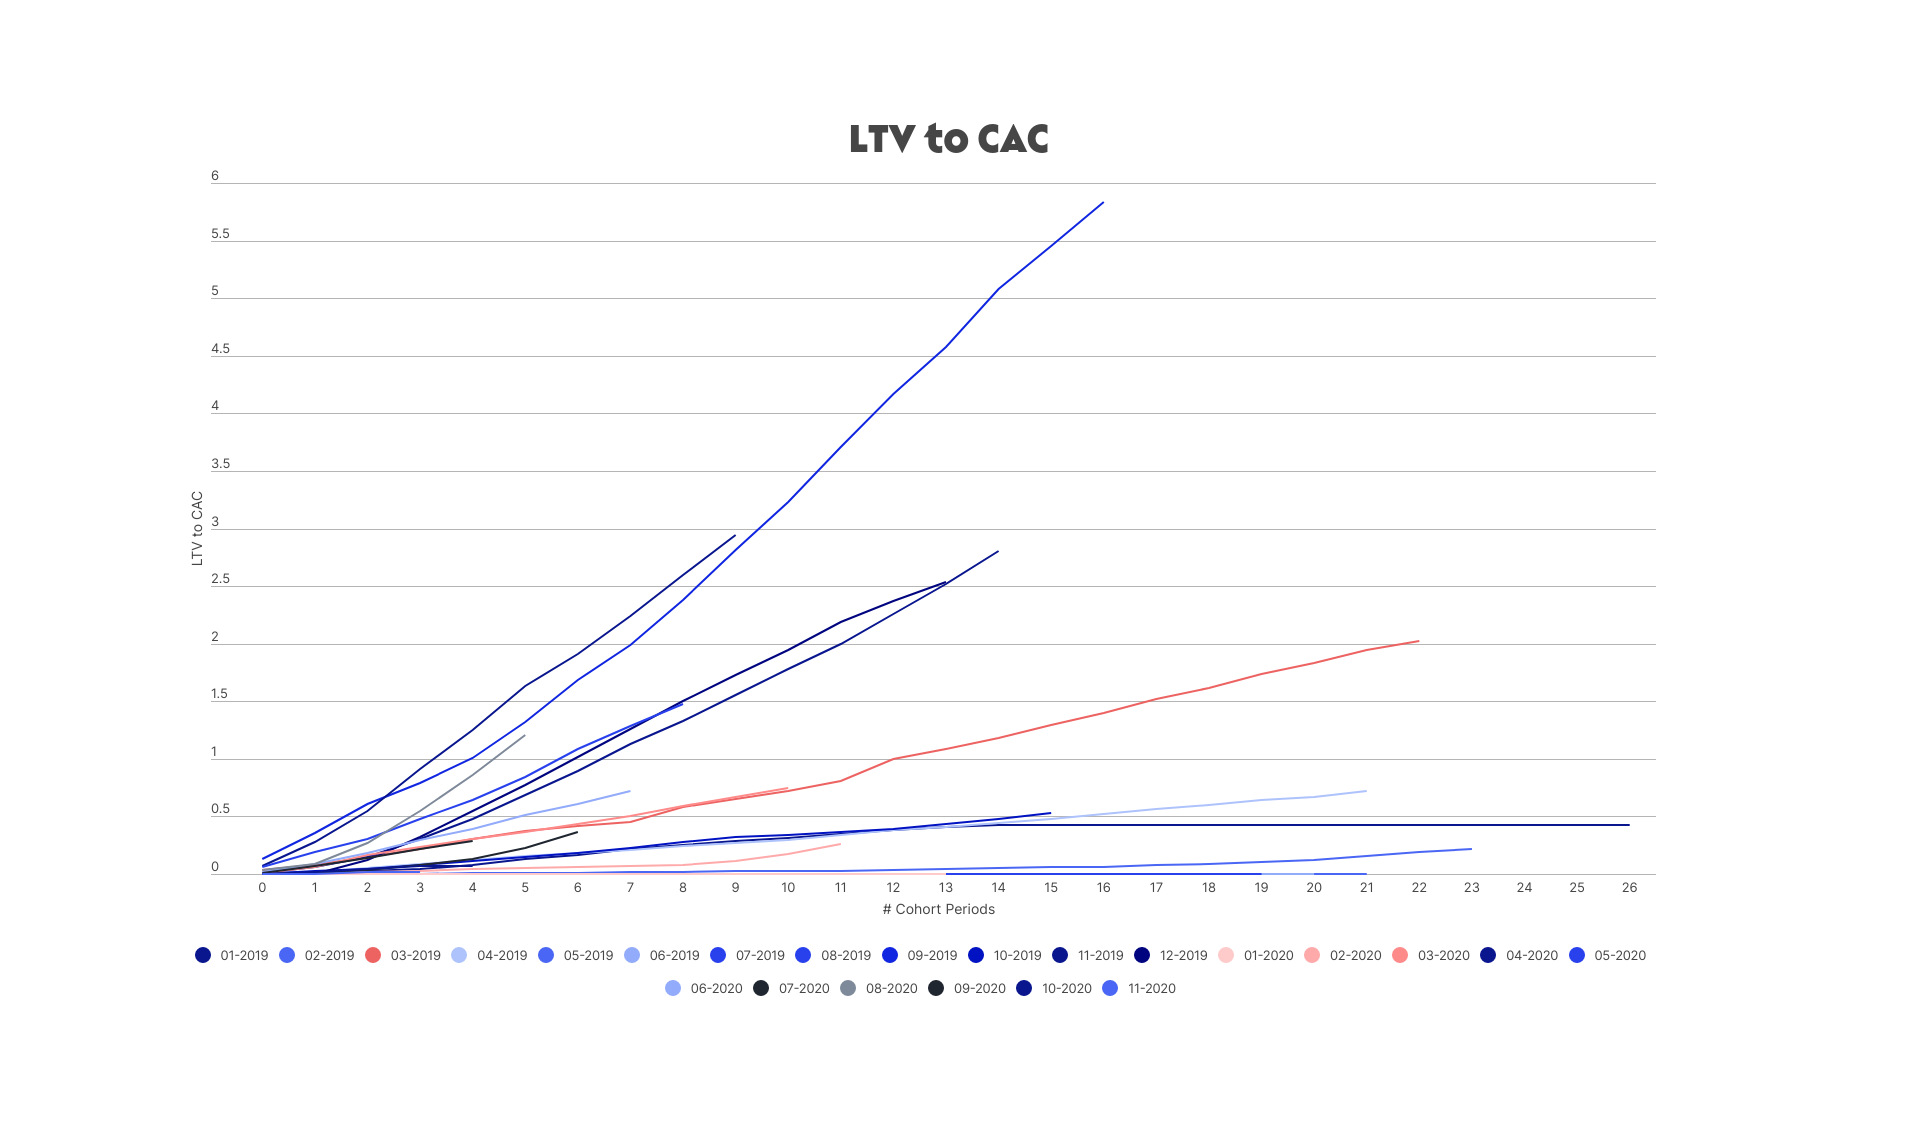 Sample LTV to CAC, January 2019 to December 2020